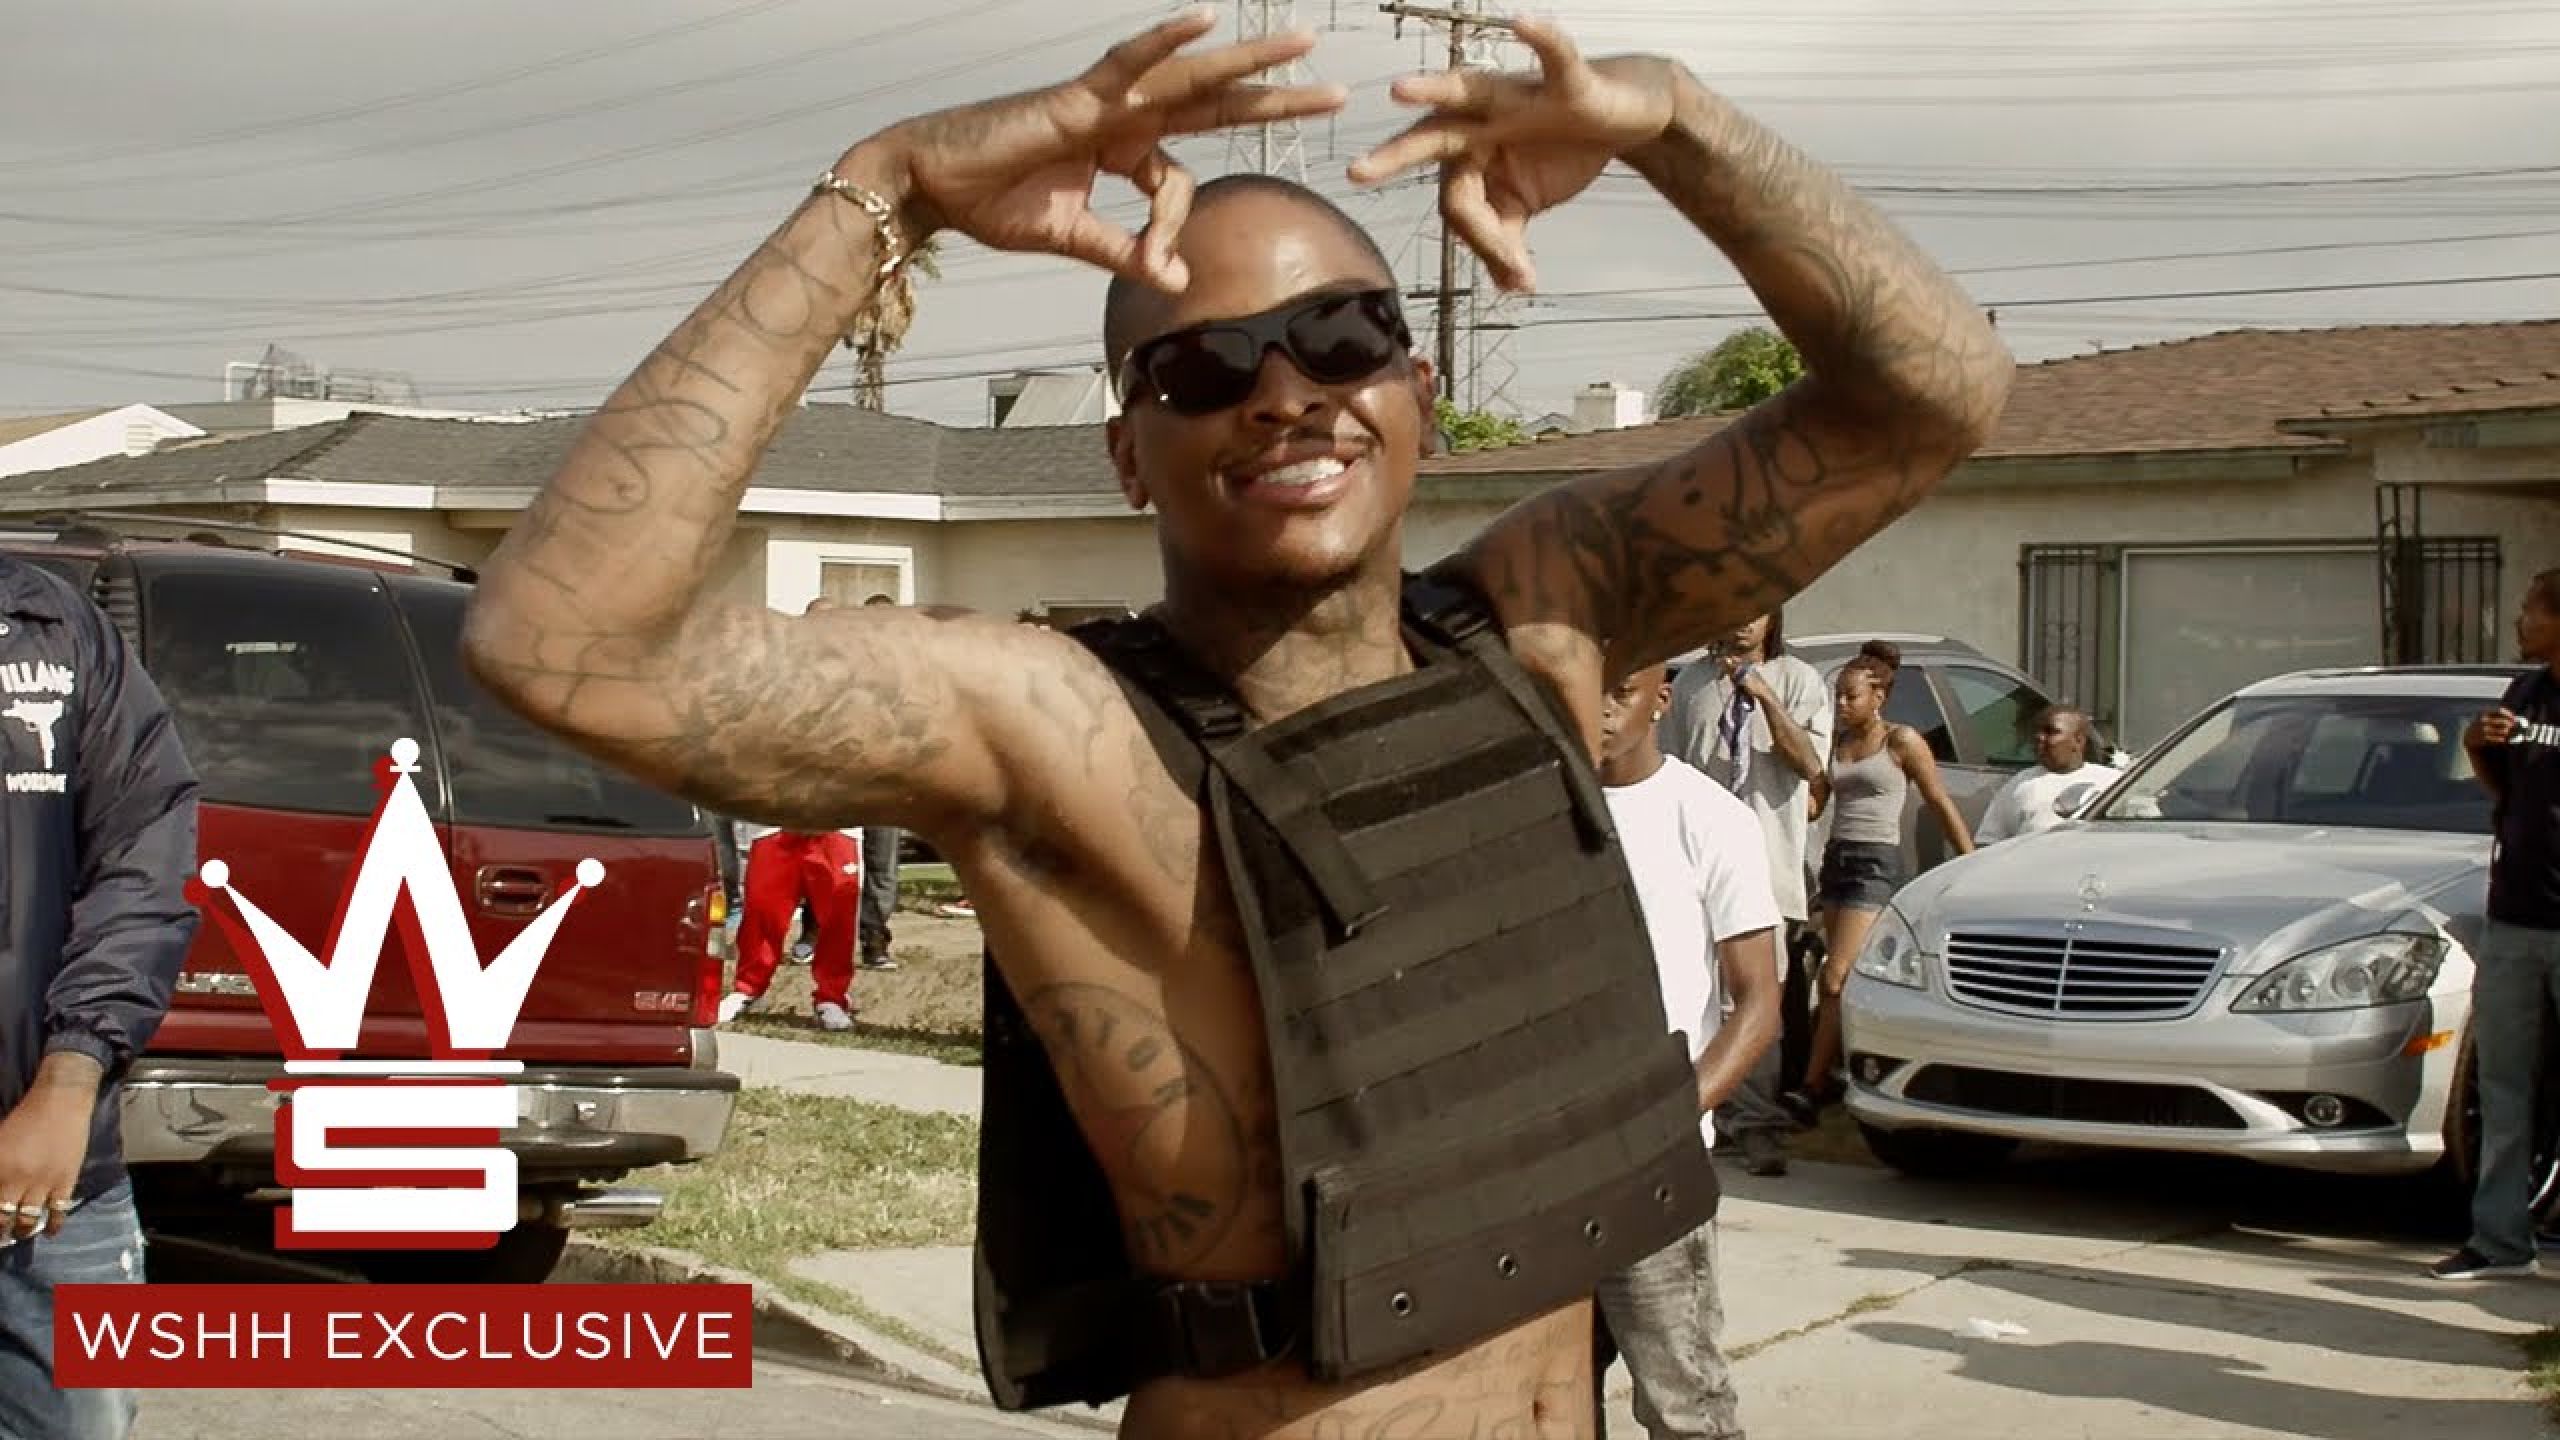 AD "Thug" Feat. YG (WSHH Exclusive - Official Music Video)